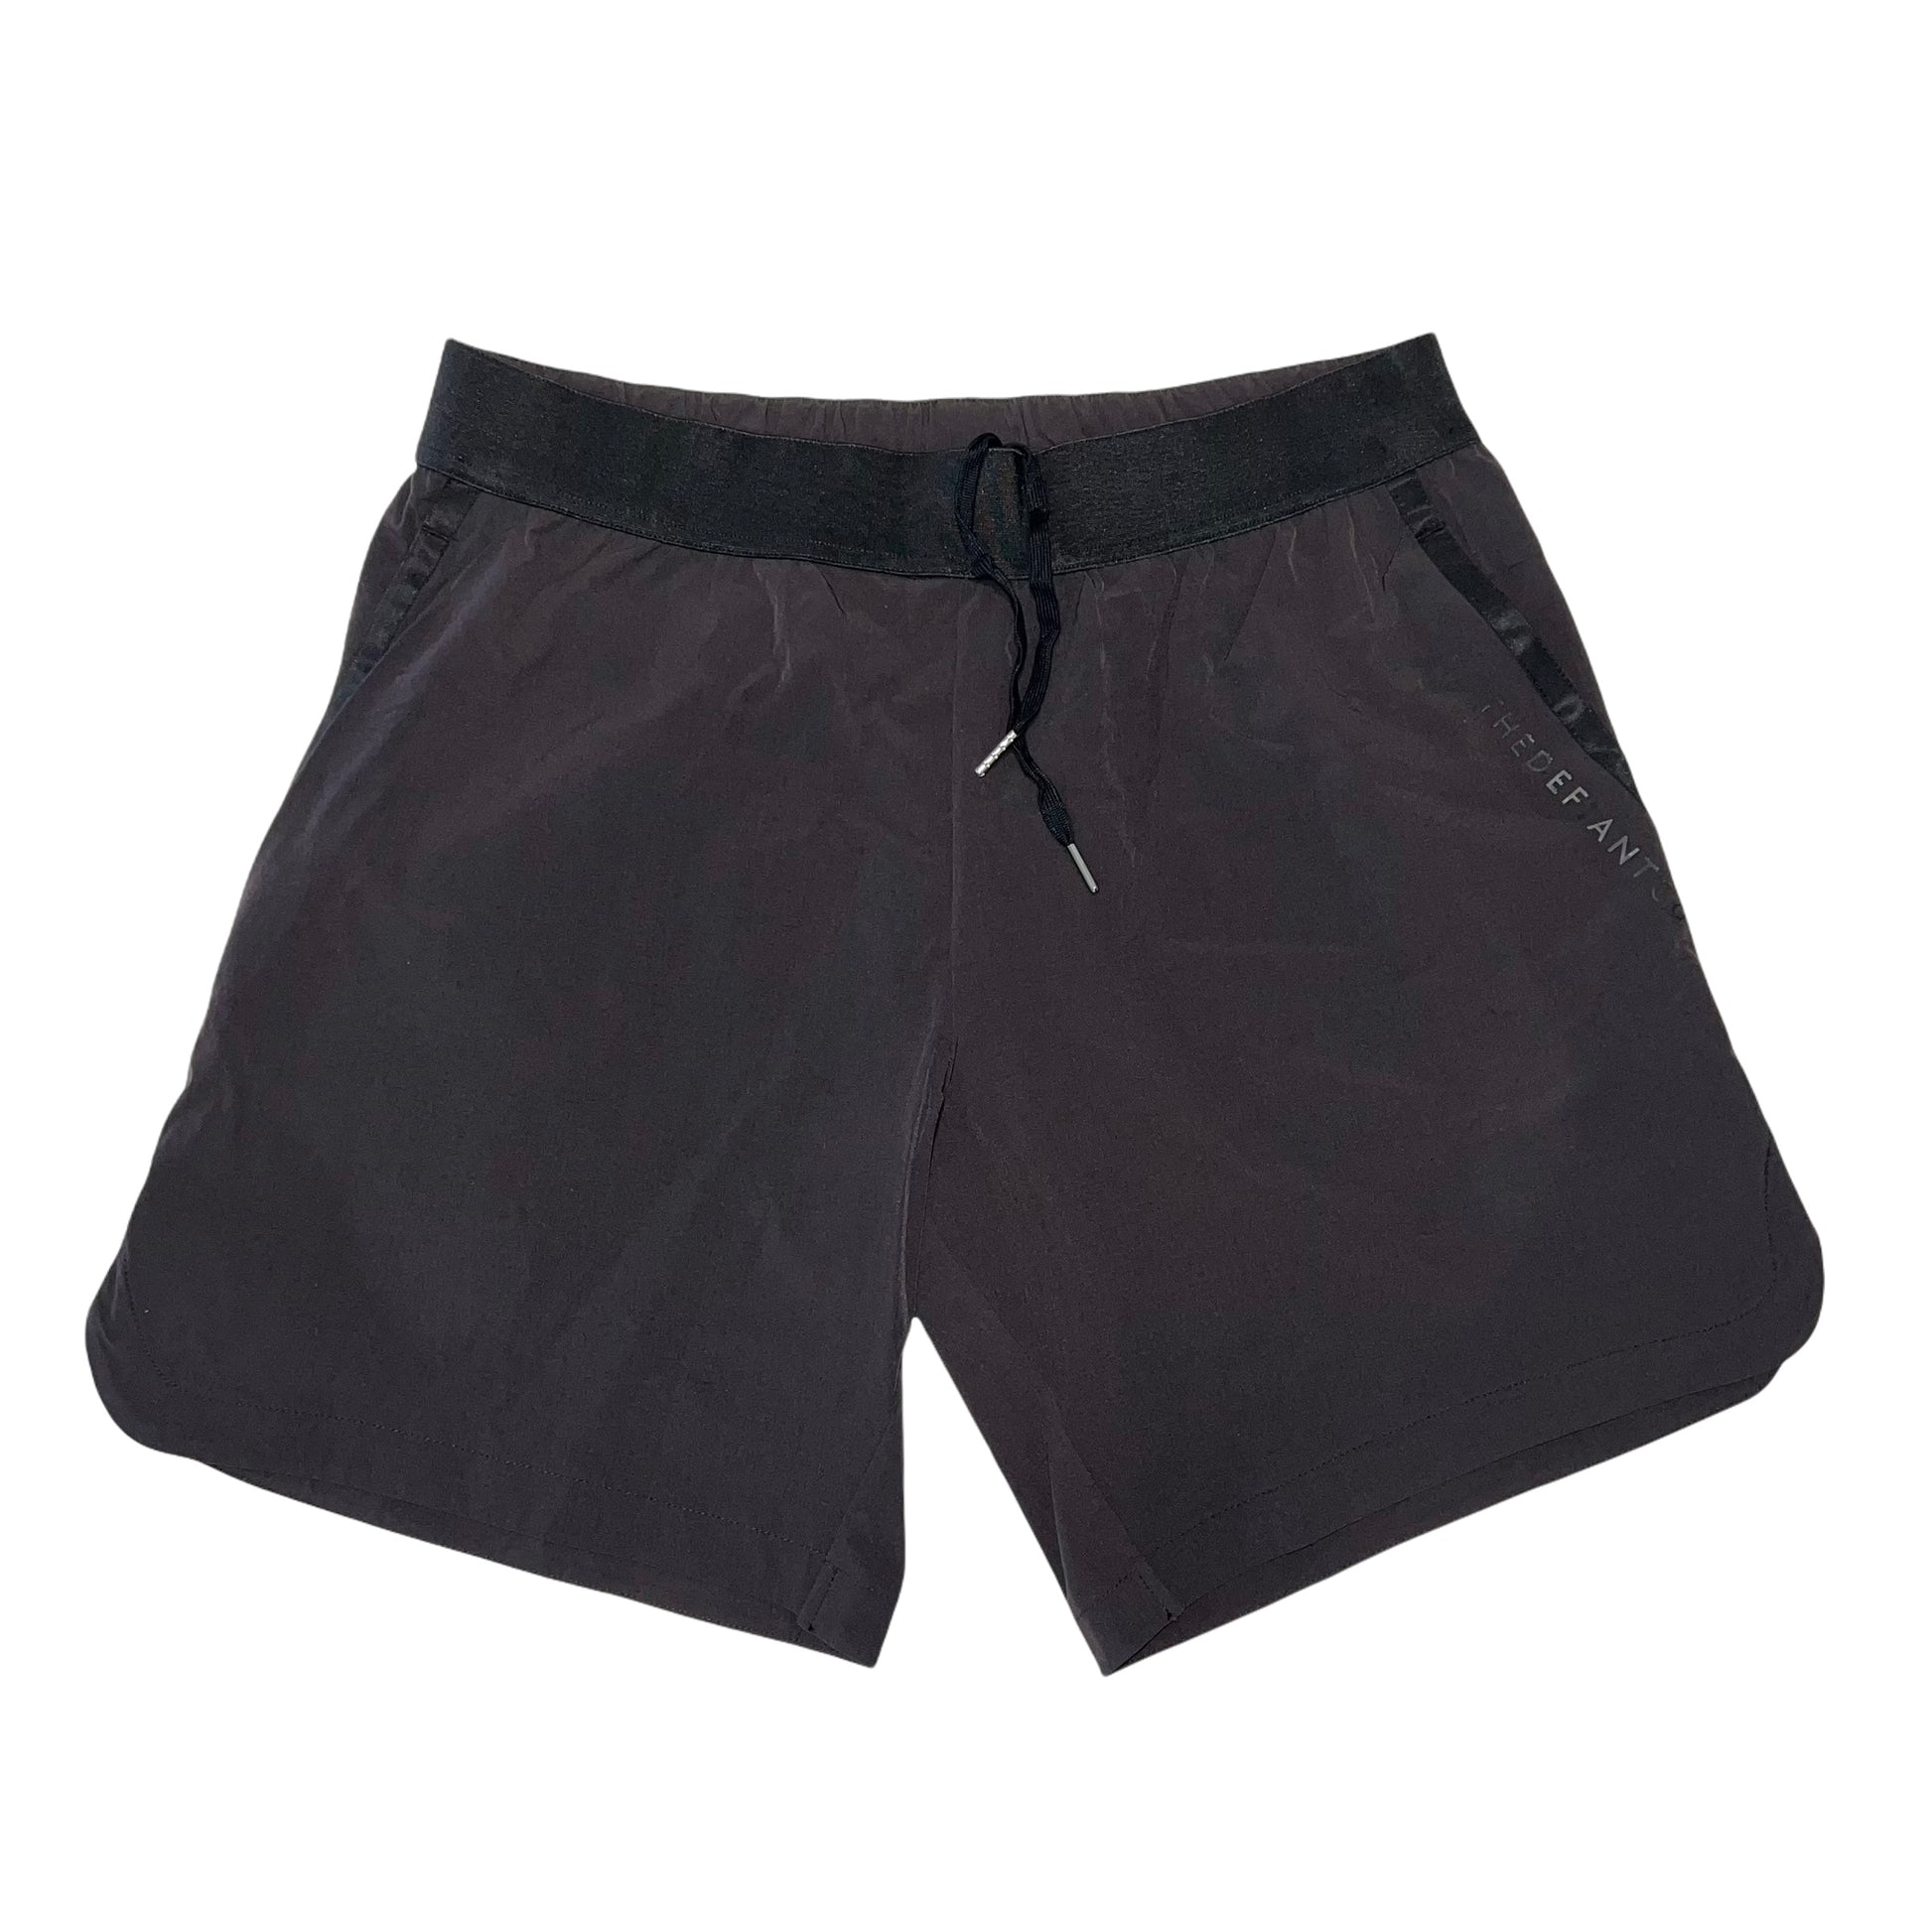 A photo of the best selling The Defiant Co Performance Shorts.  The shorts have a black elasticated waistband with draw strings and have The Defiant Co logo down the left leg.  The shorts have two pockets, one either side and are the colour charcoal.